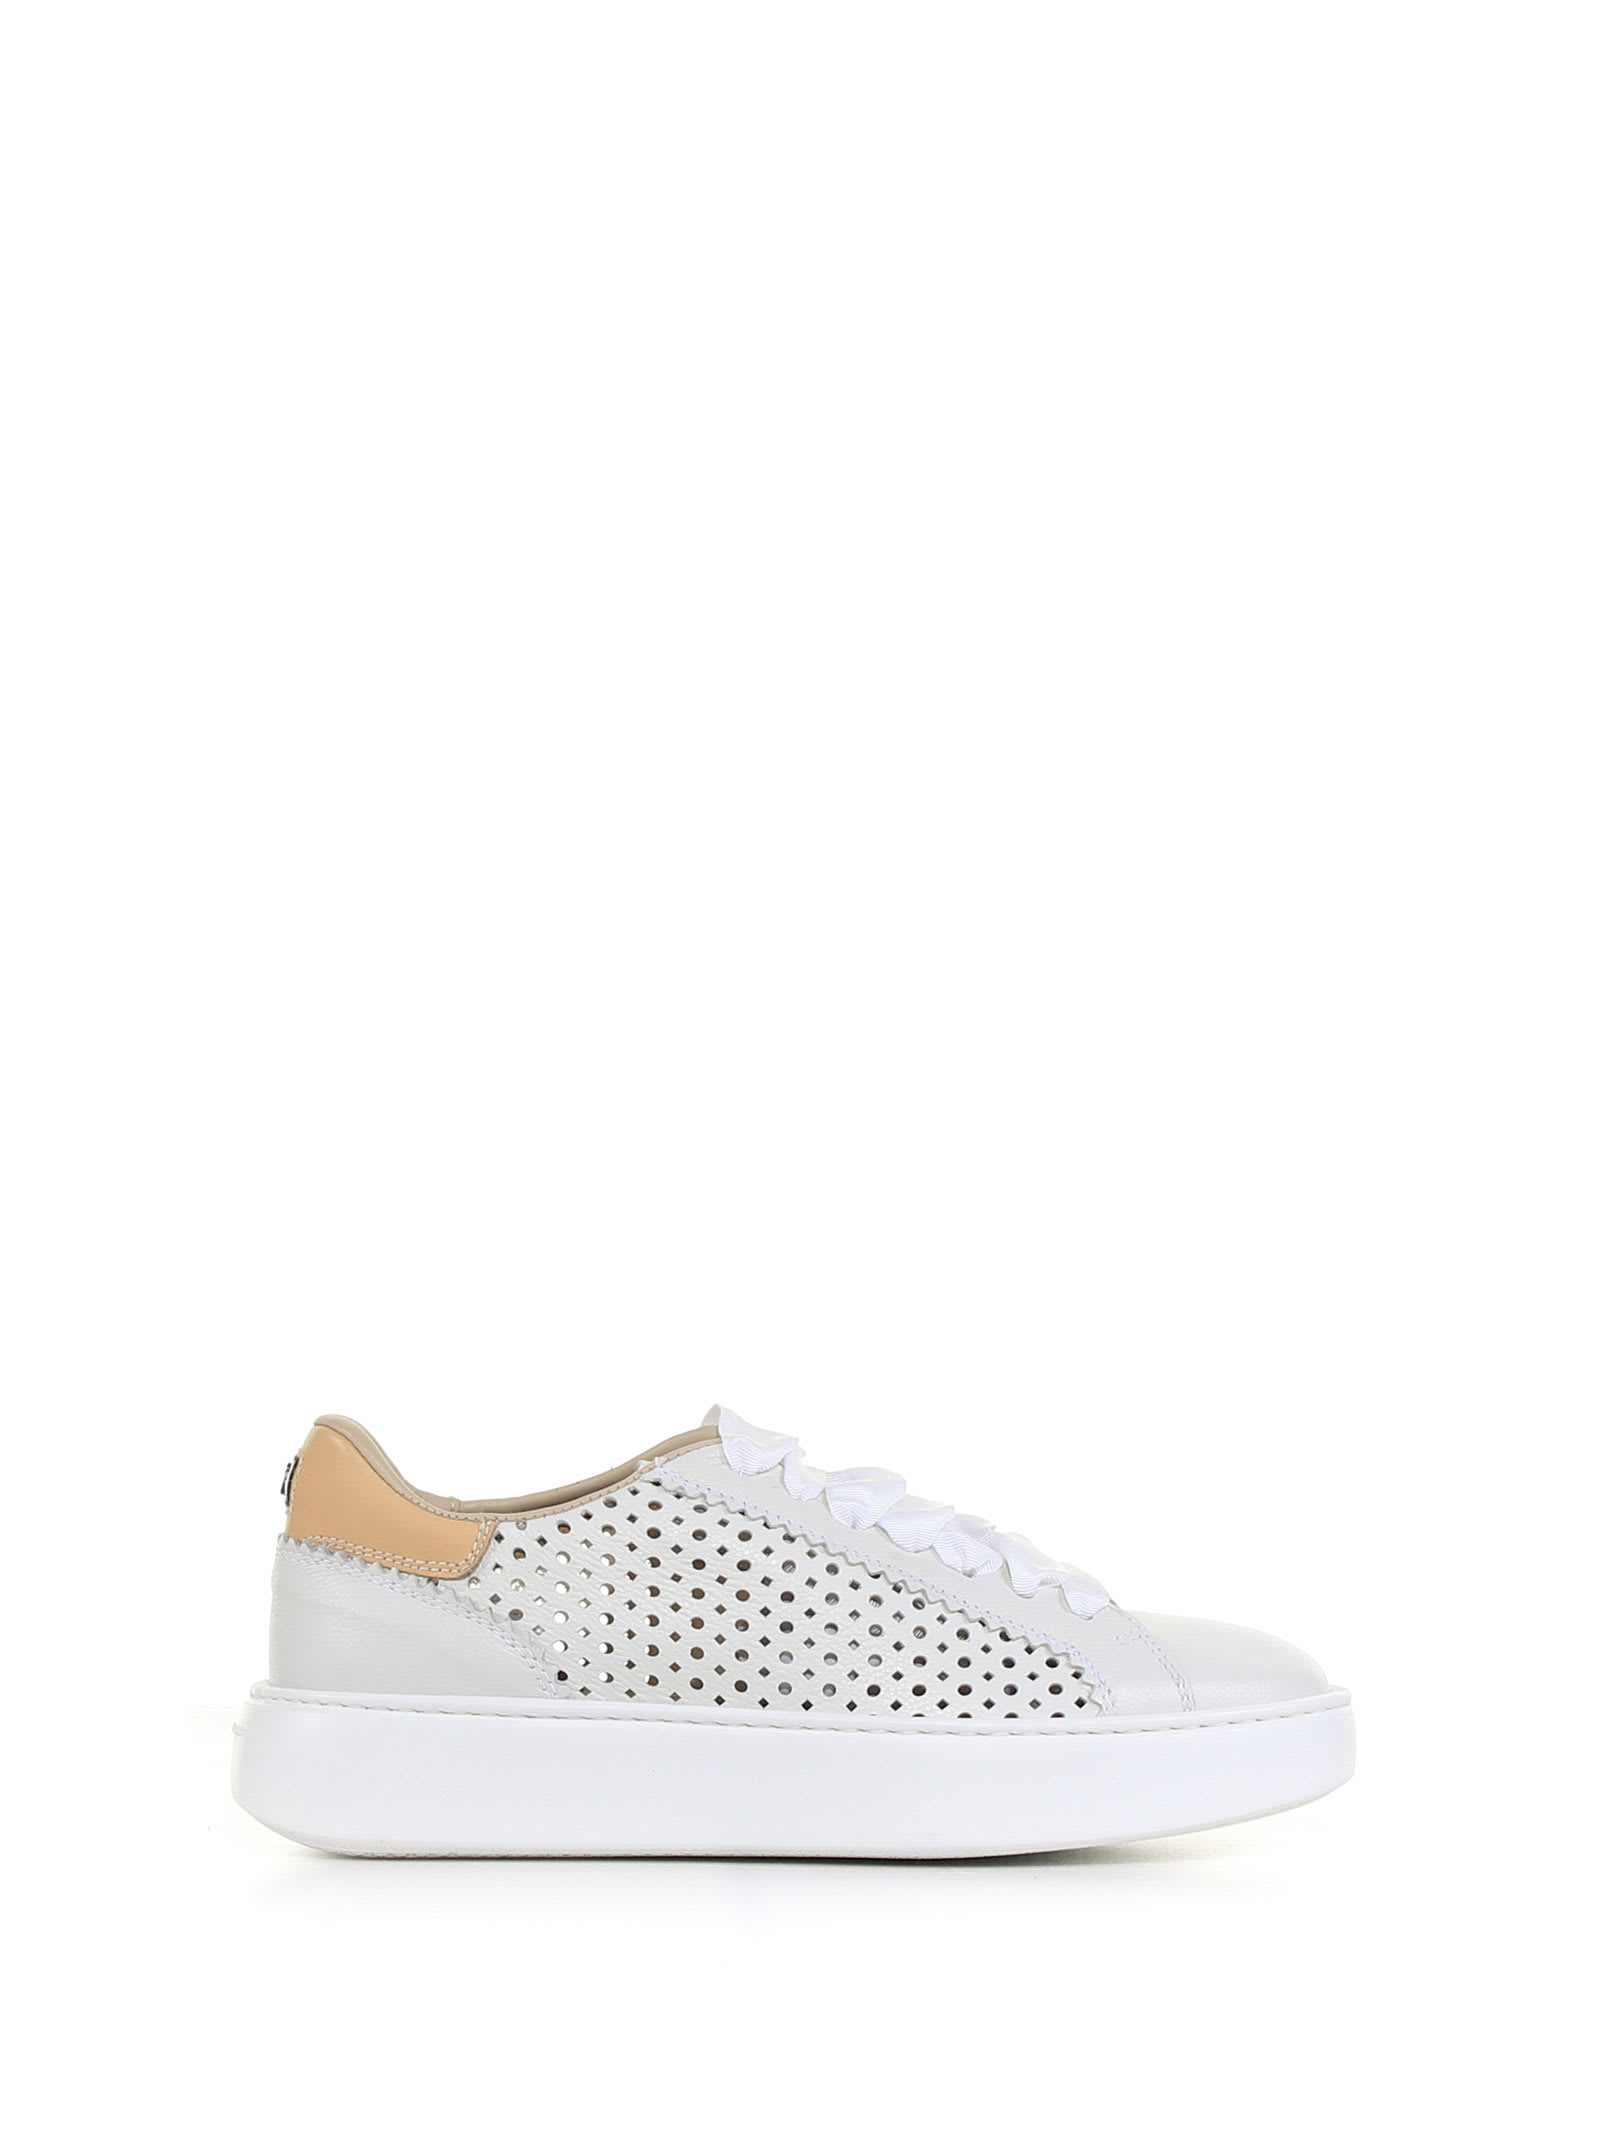 Fratelli Rossetti Sneakers In Perforated Leather